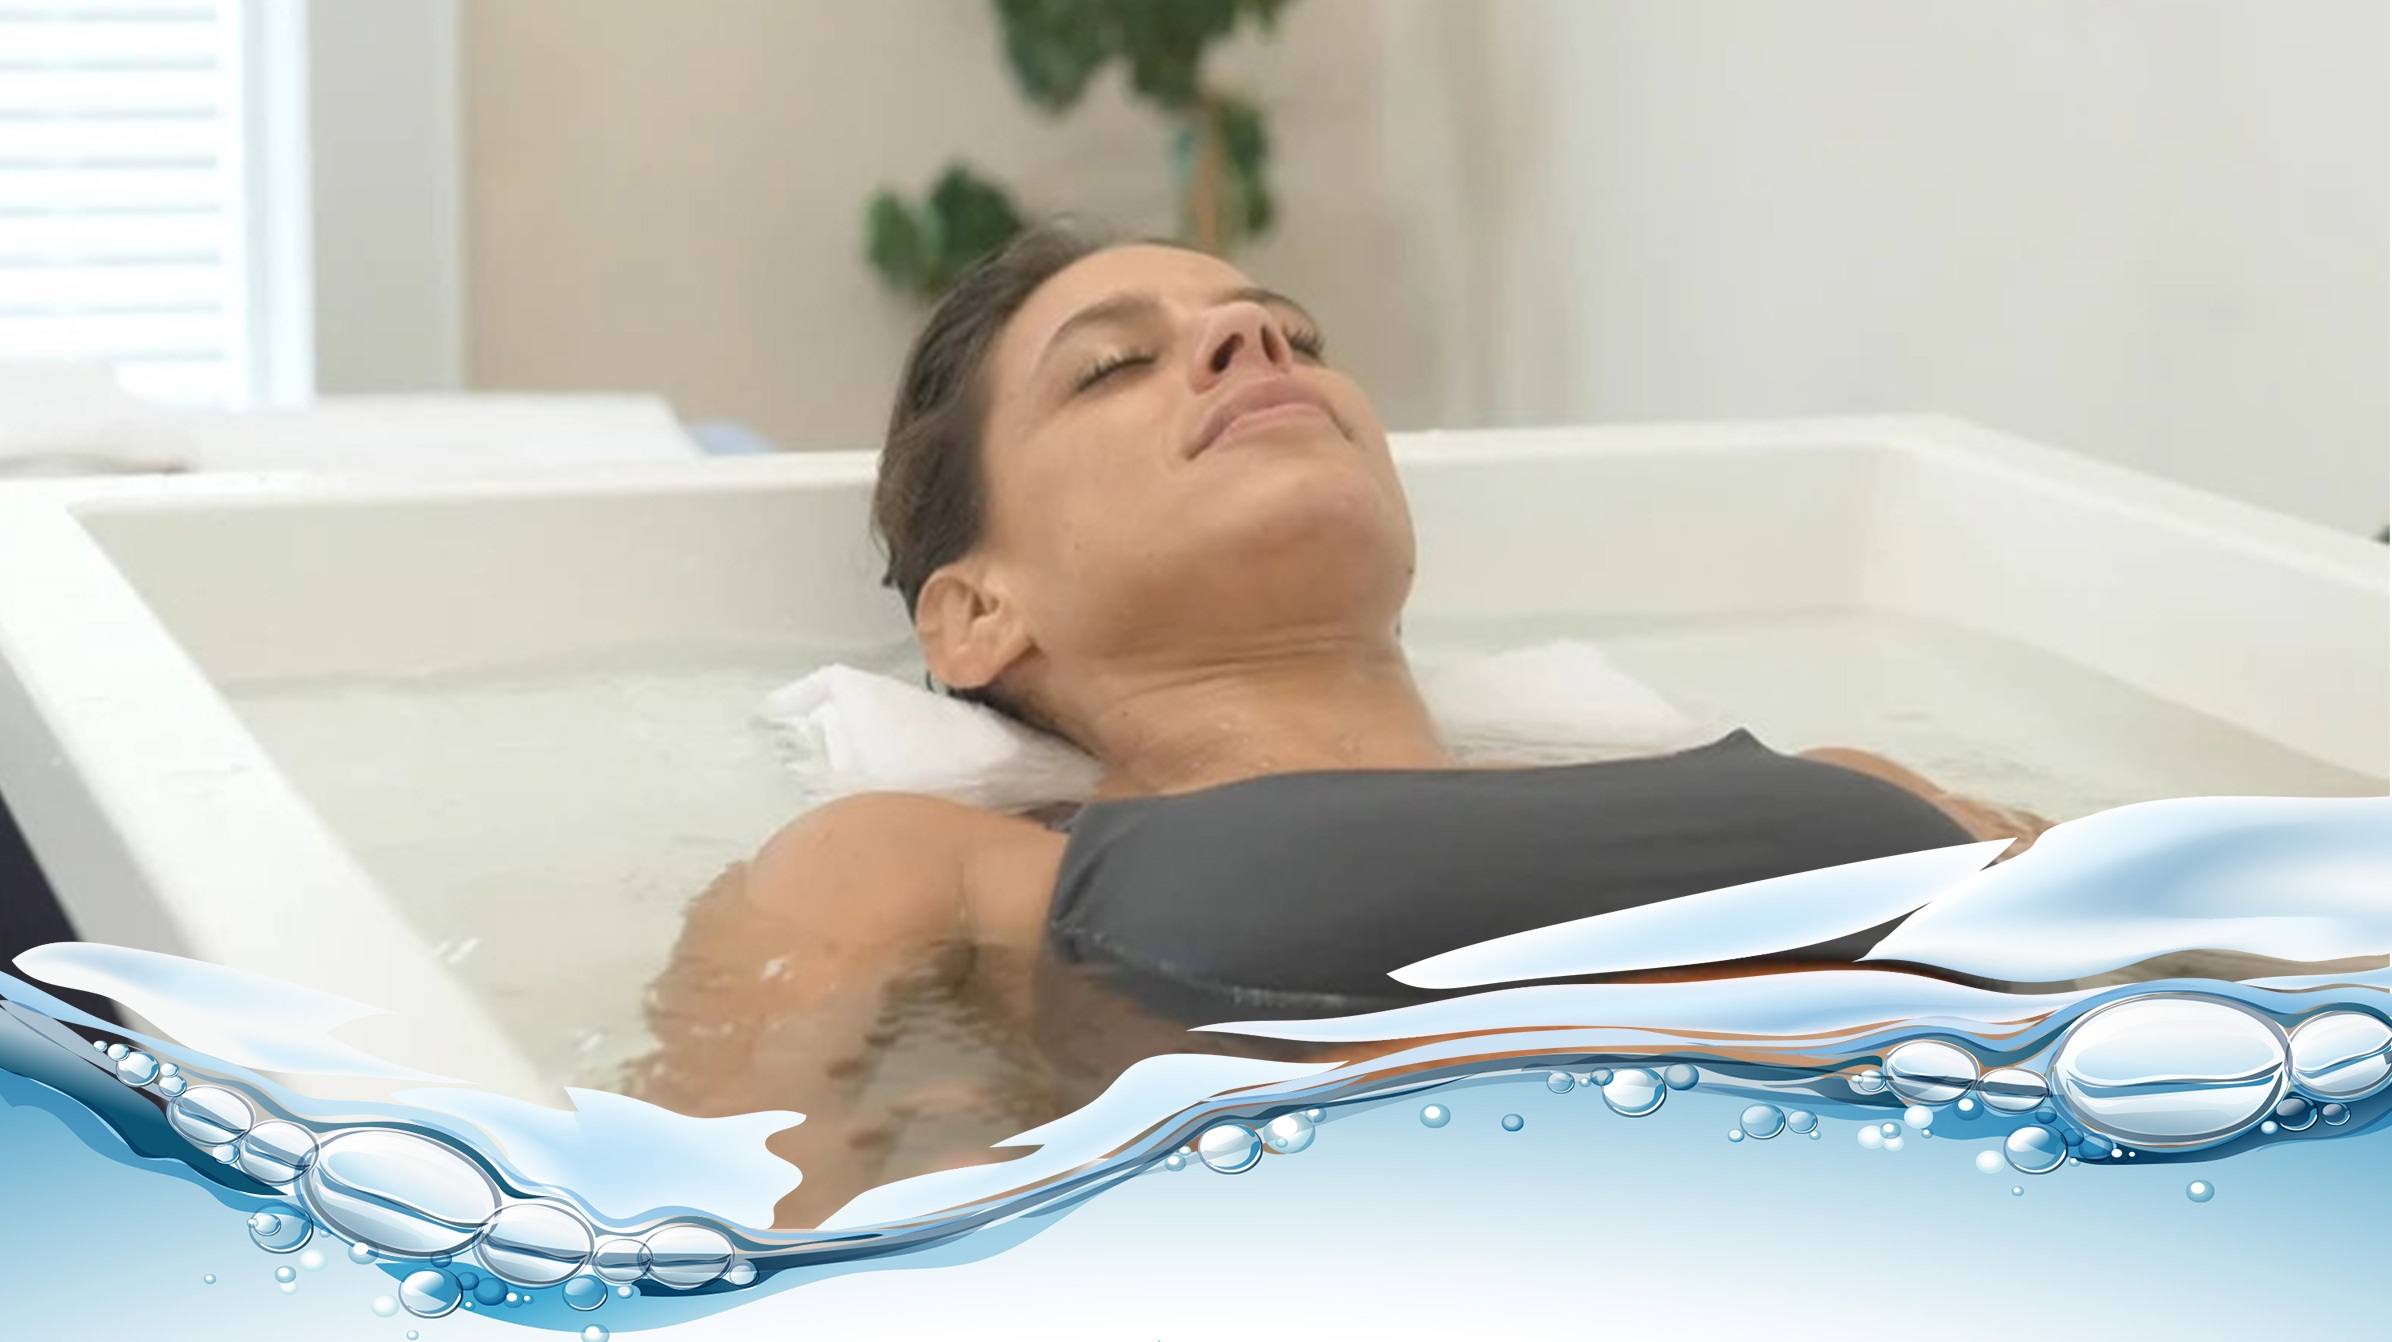 Water Immersion Massage Table, Saturday, June 26, 2021, Press release picture